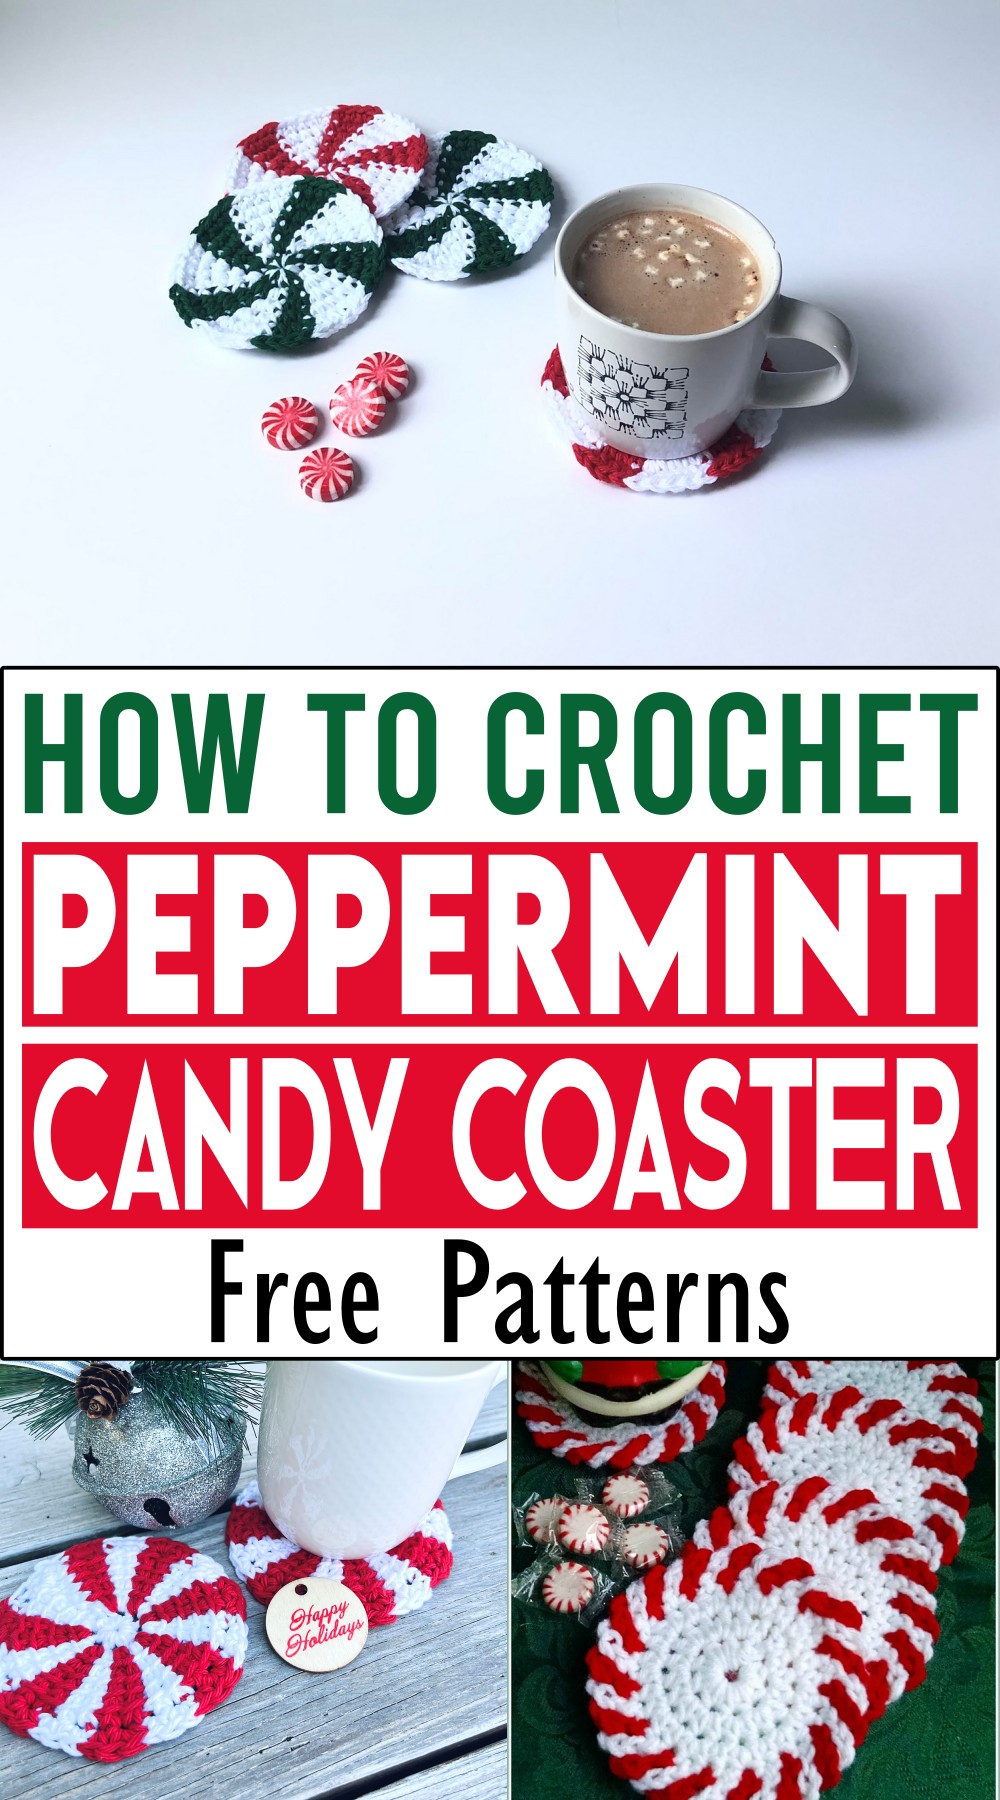 How to Crochet Peppermint Candy Coaster